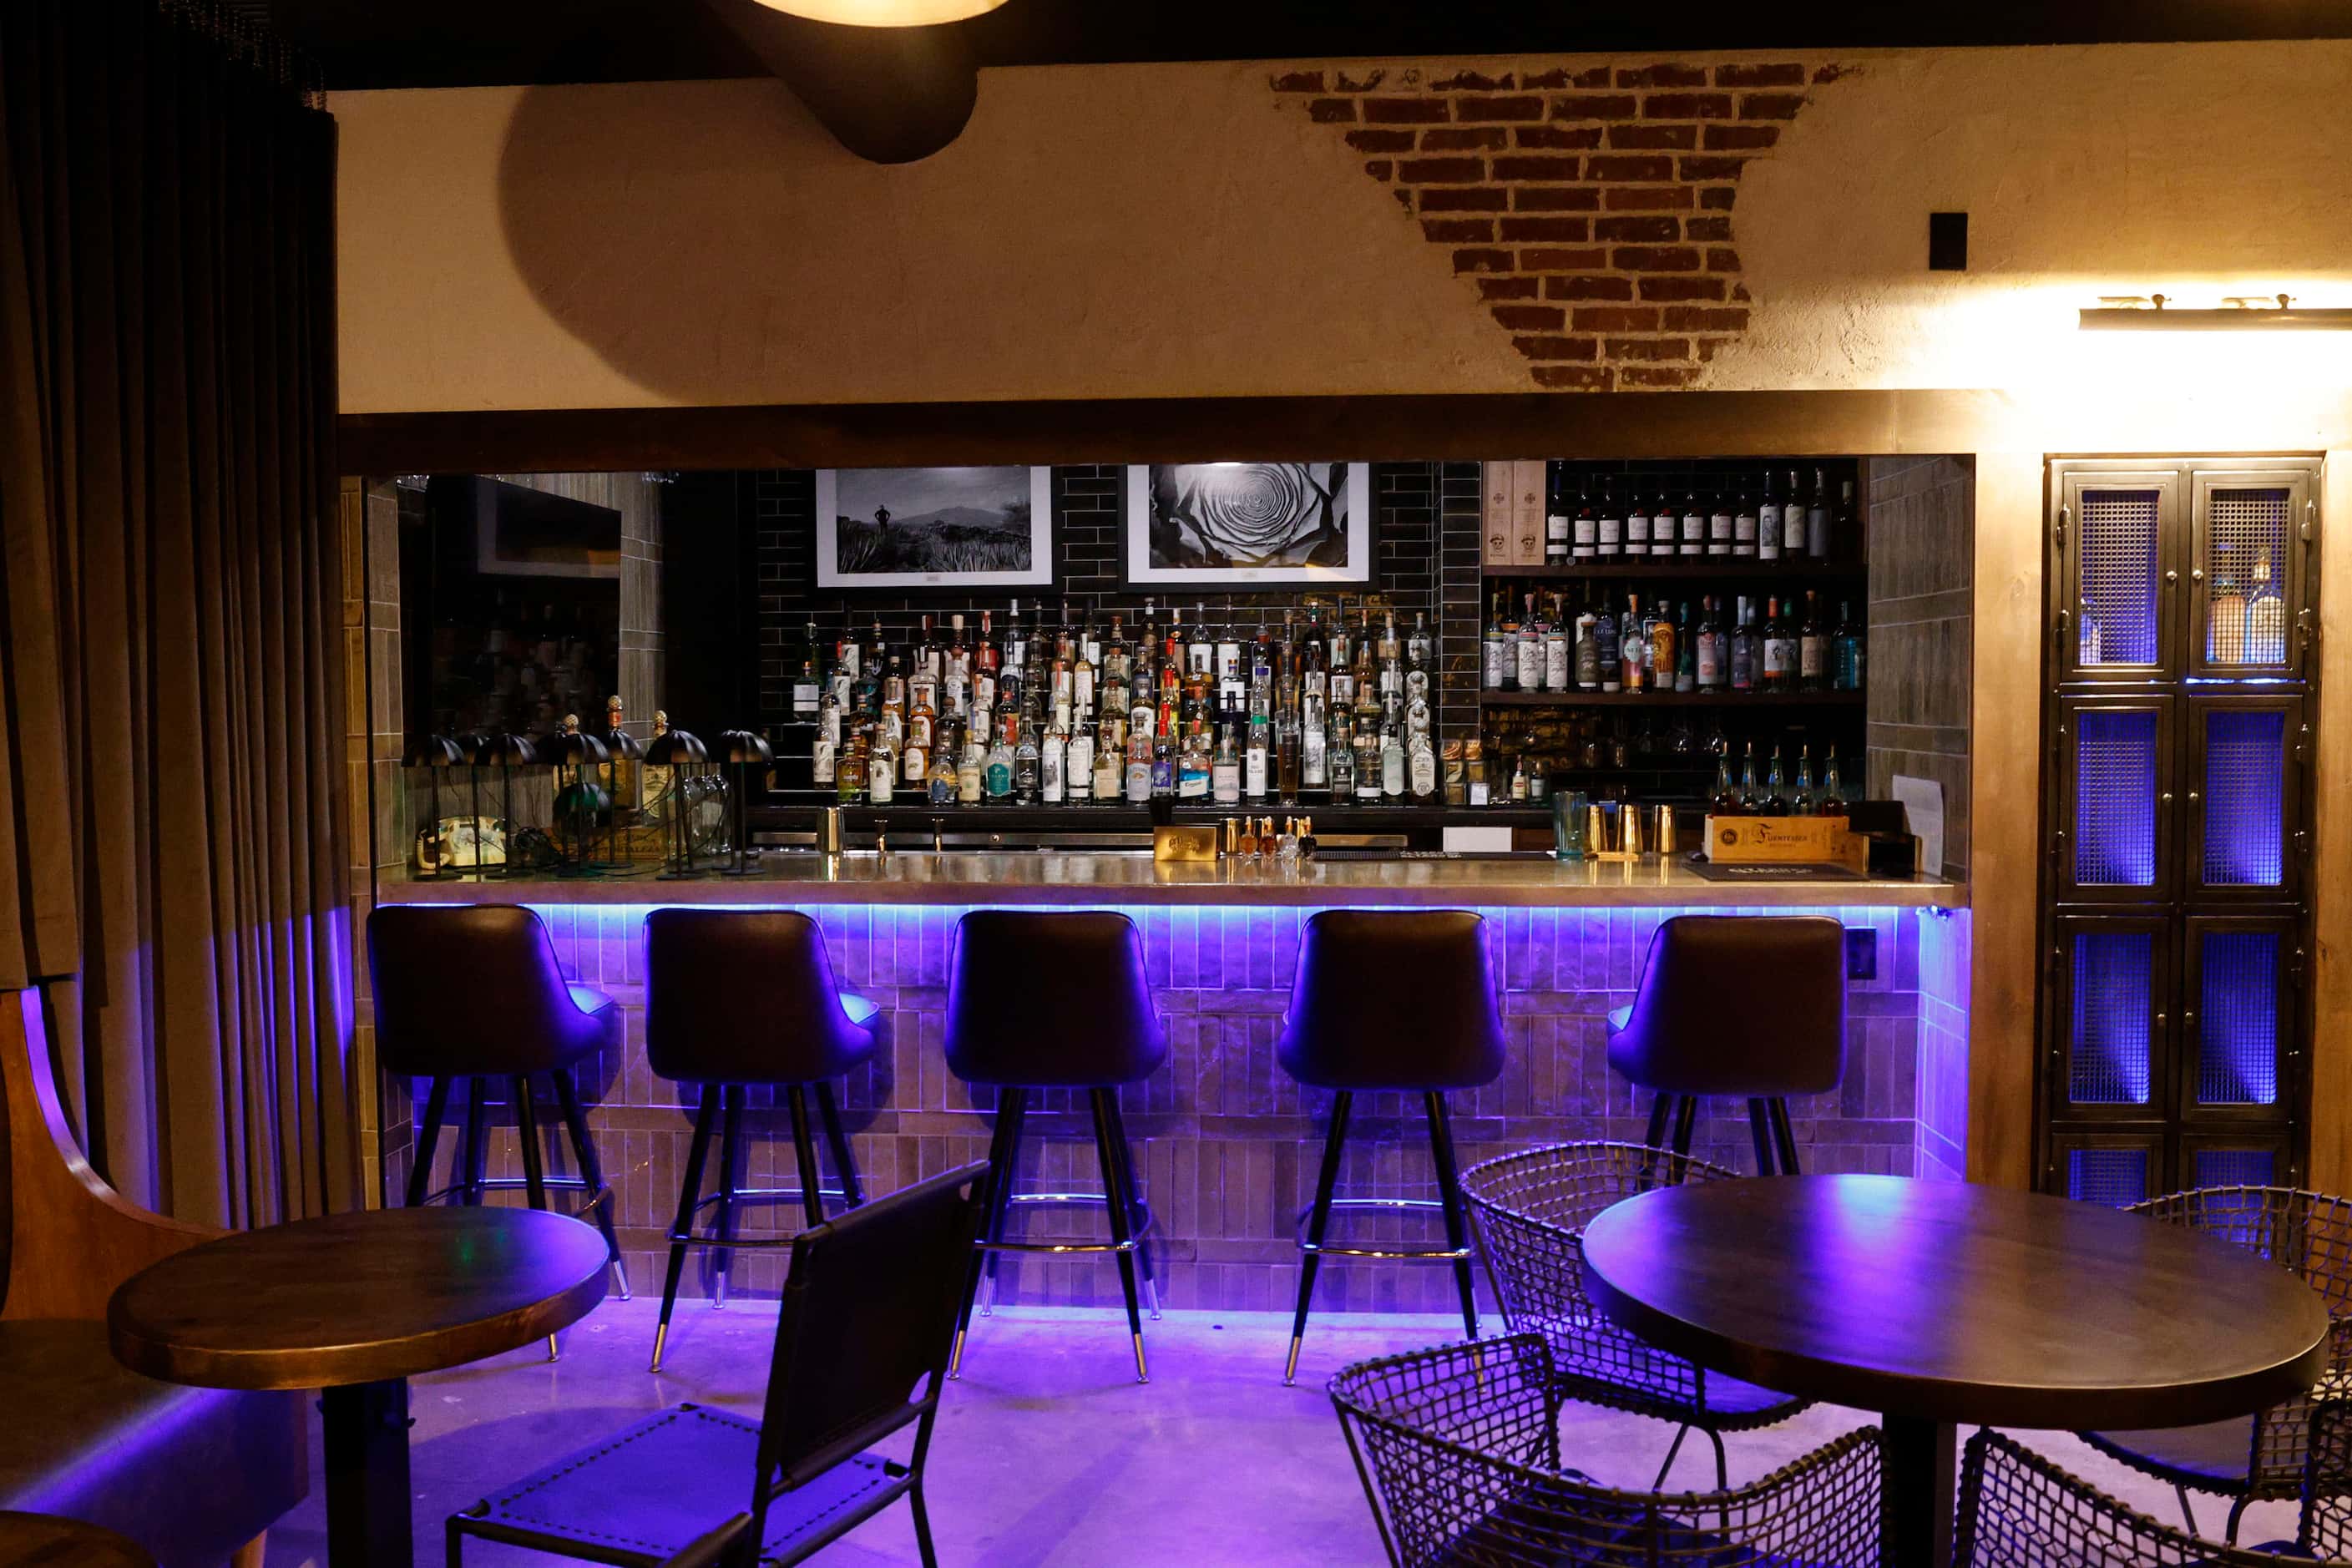 Upstairs, Customs is a private tequila bar with a stout agave selection and a much smaller...